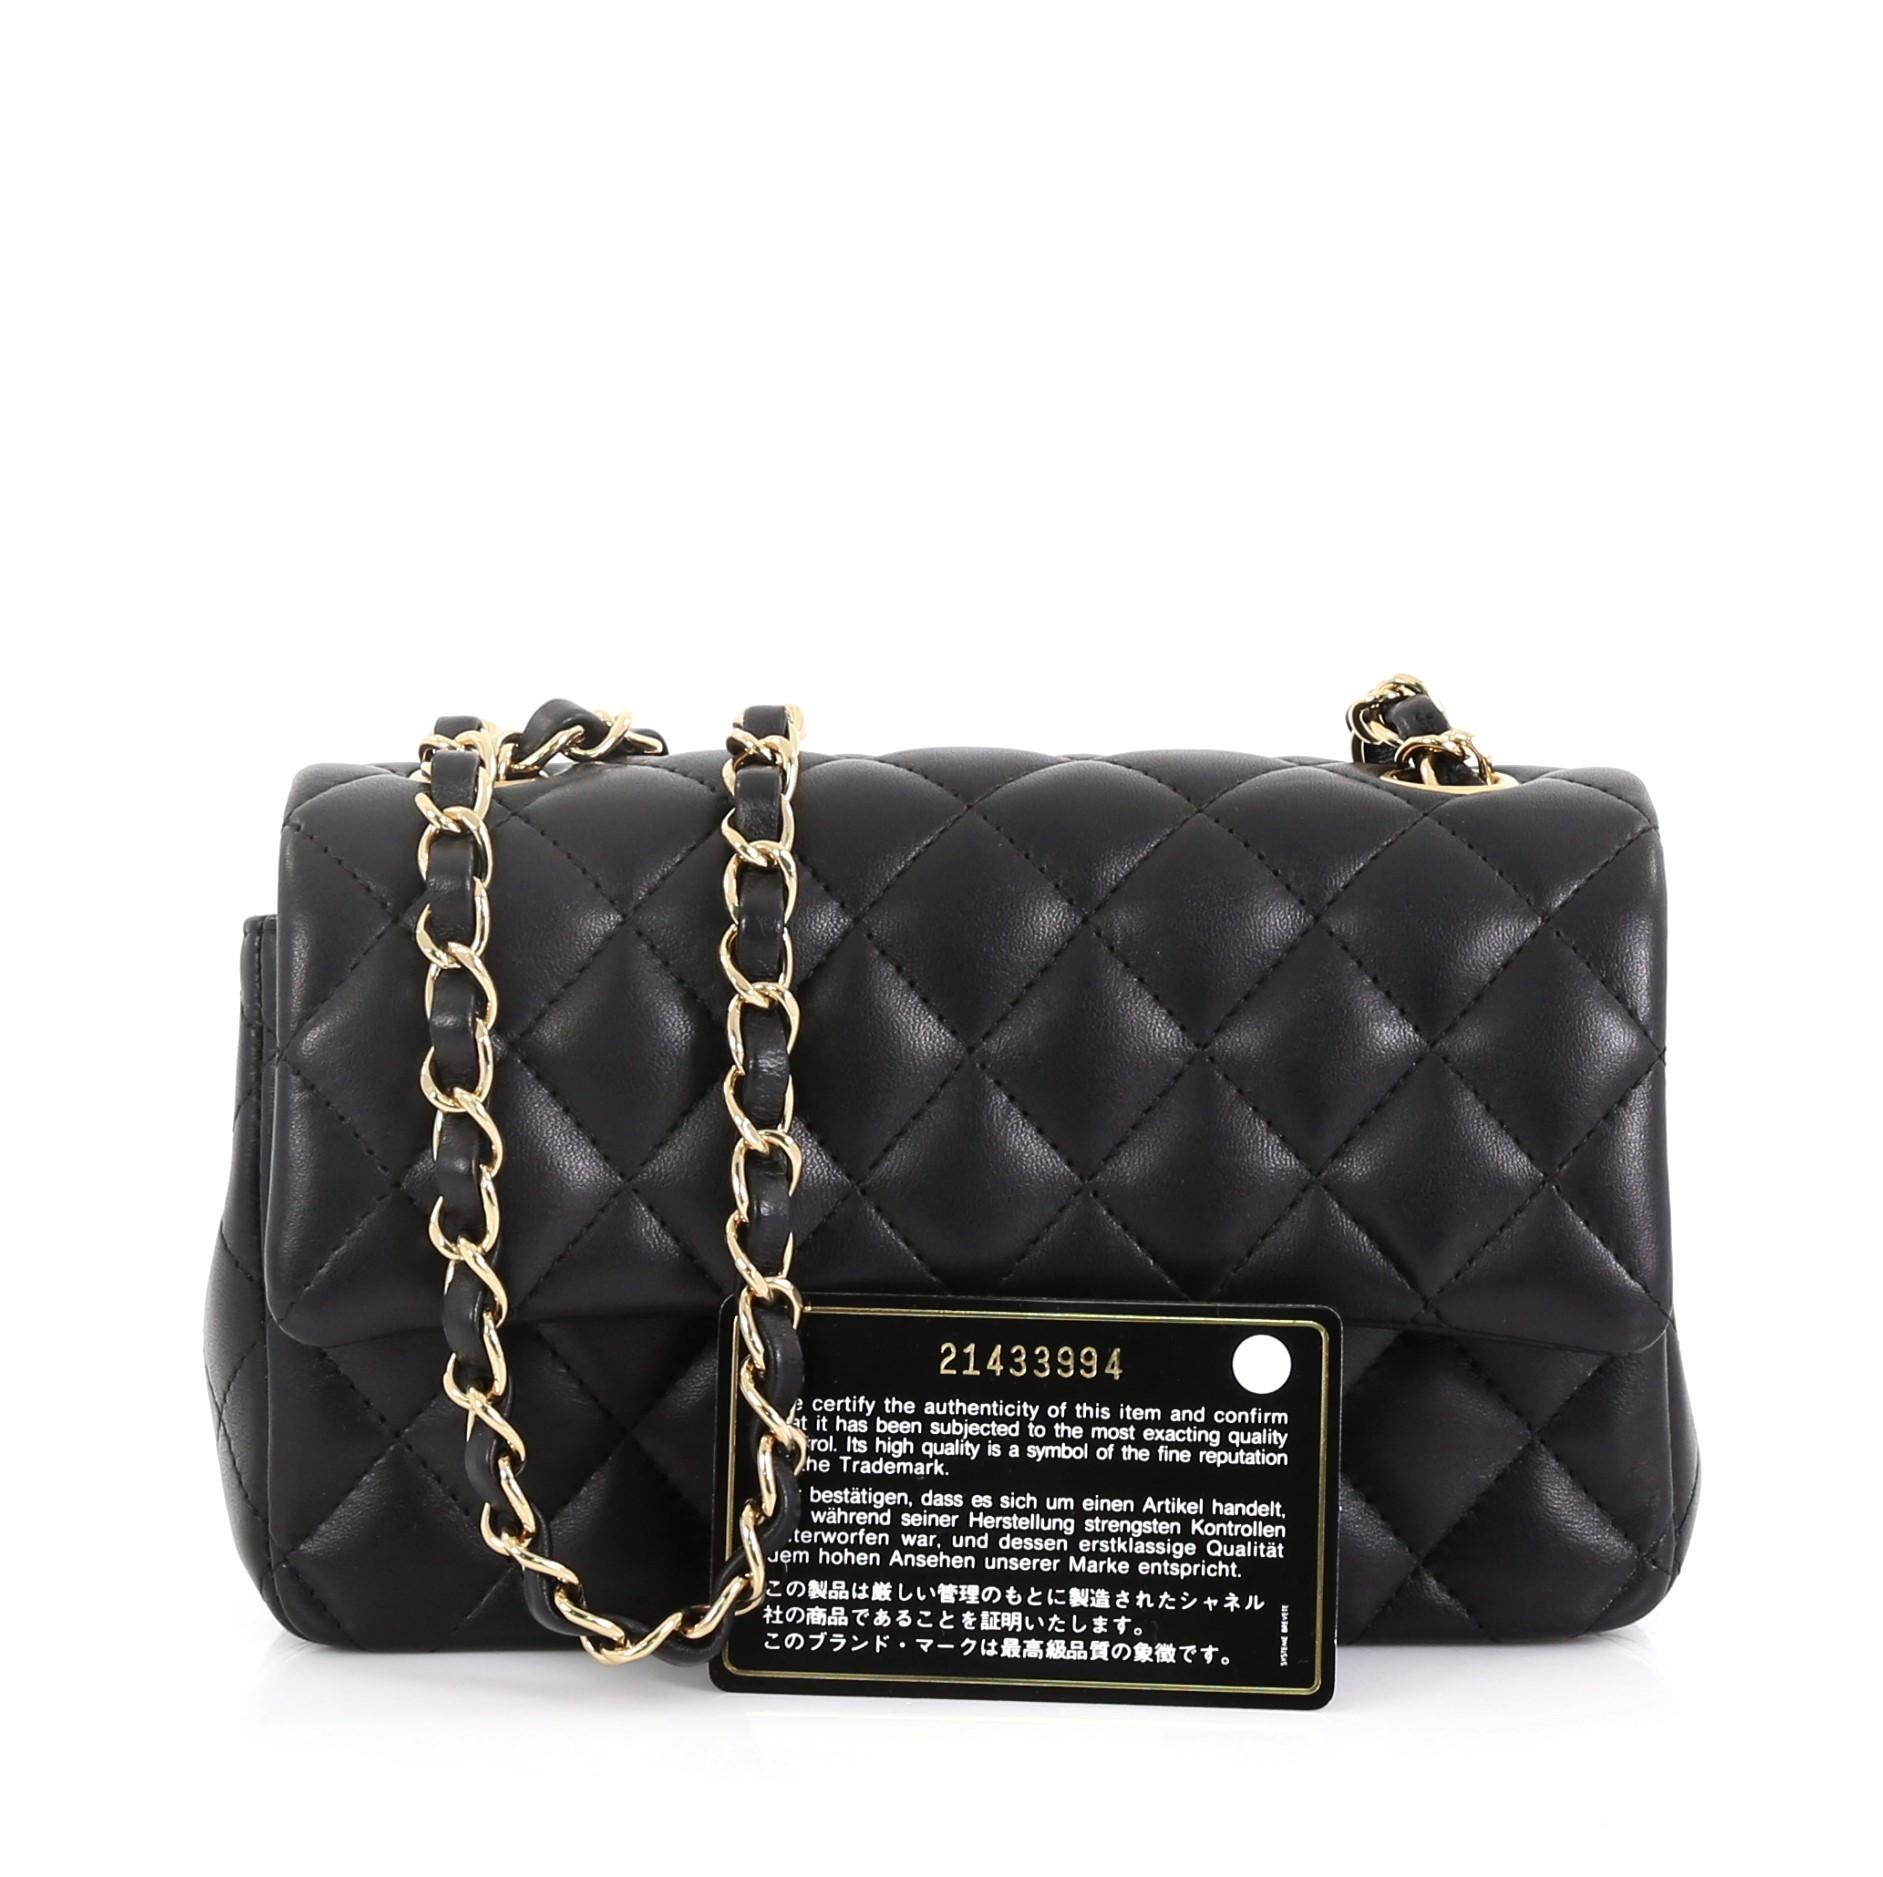 This Chanel Classic Single Flap Bag Quilted Lambskin Mini, crafted in black quilted lambskin, features woven-in leather chain link strap, exterior back slip pocket, and gold-tone hardware. Its CC turn-lock closure opens to a black leather interior